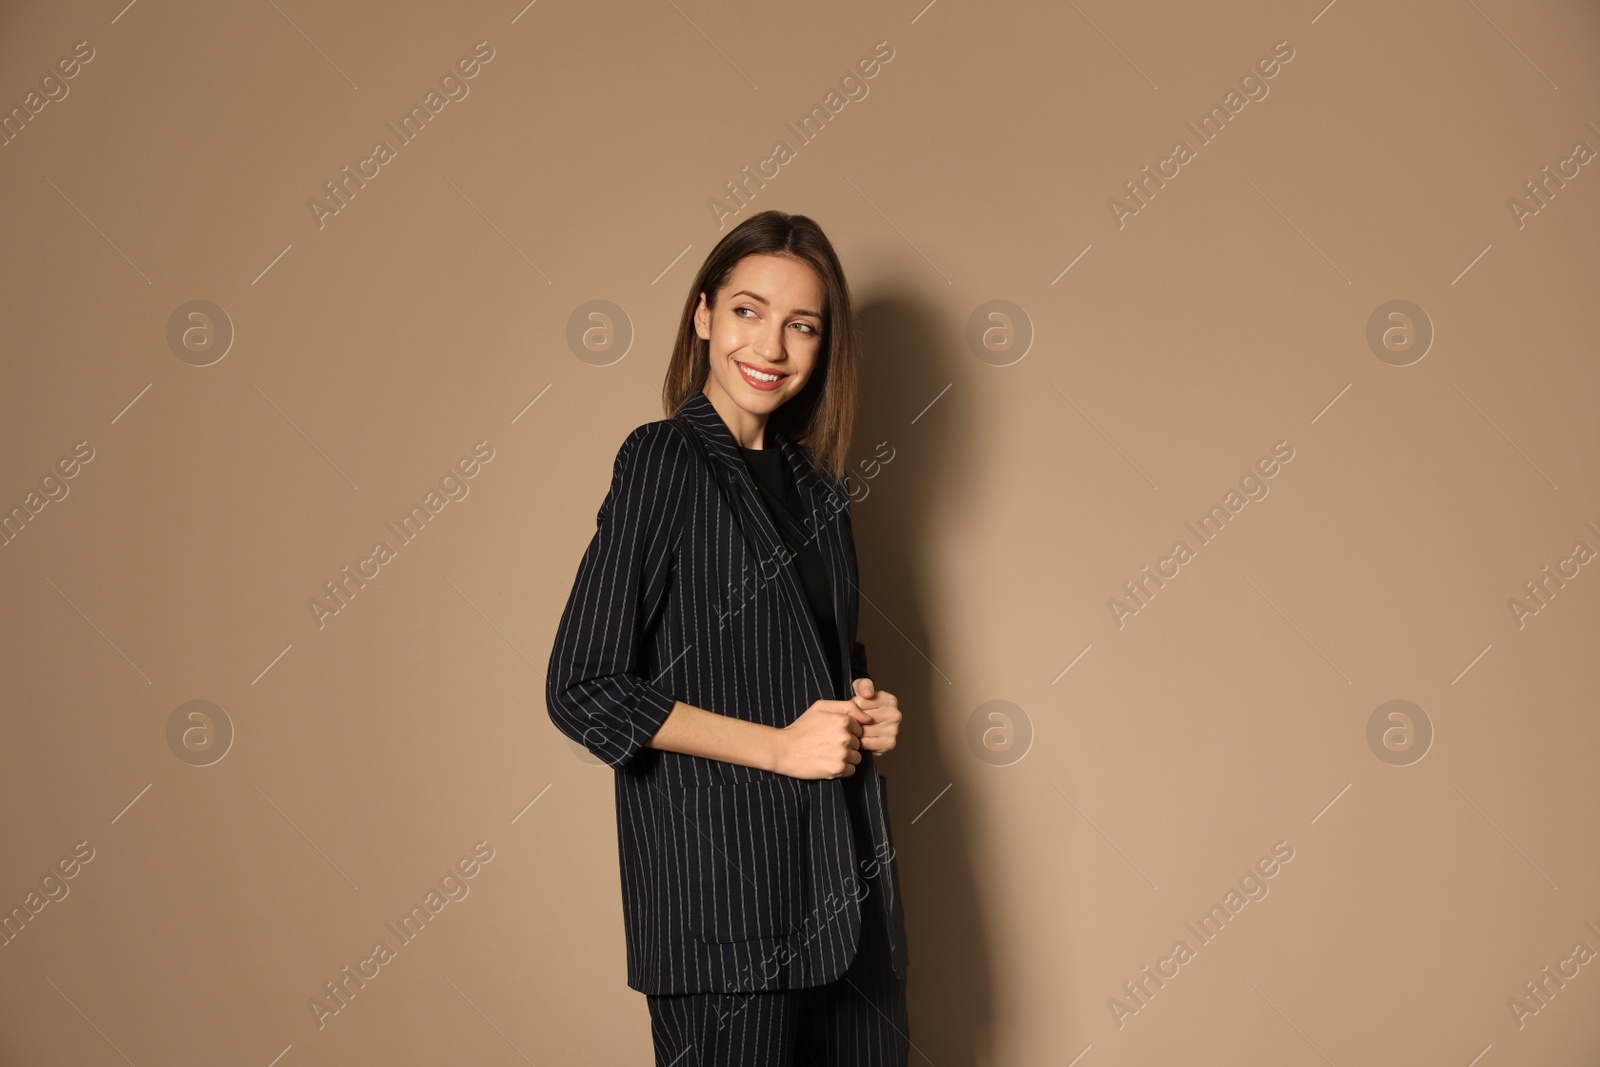 Photo of Portrait of beautiful young woman in fashionable suit on beige background. Business attire